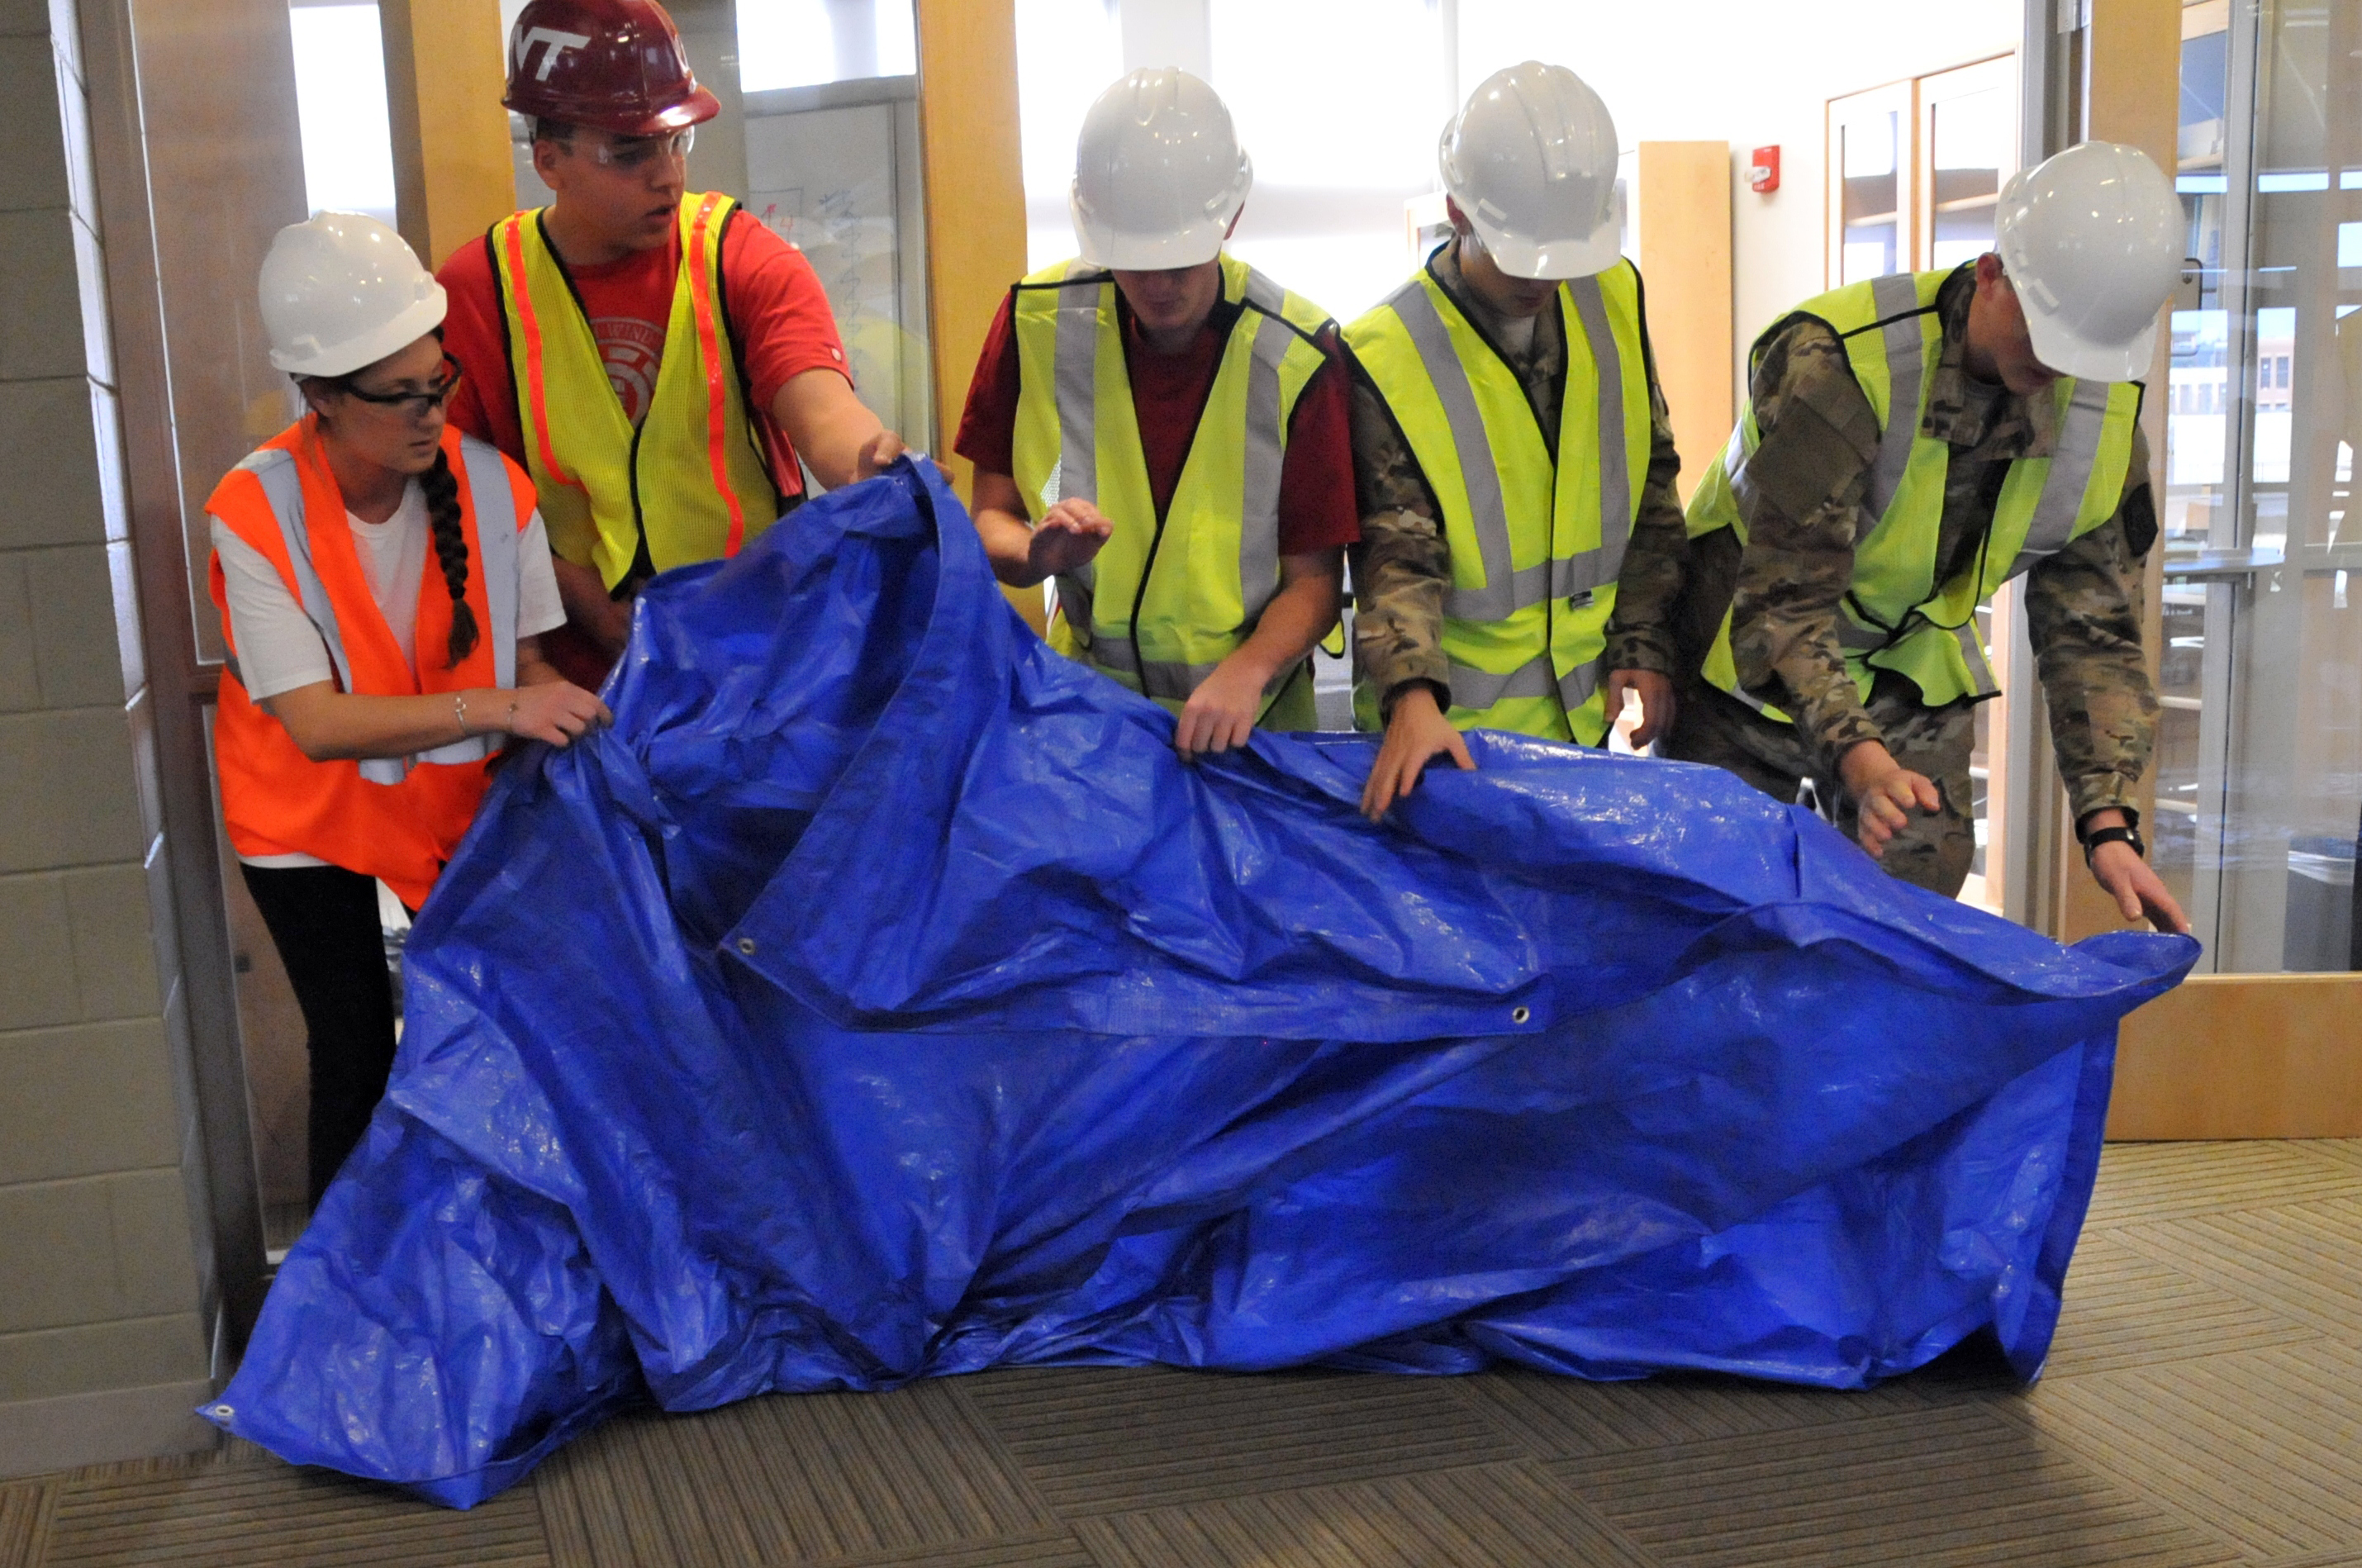 Students in safety helmets and vests working with a tarp.